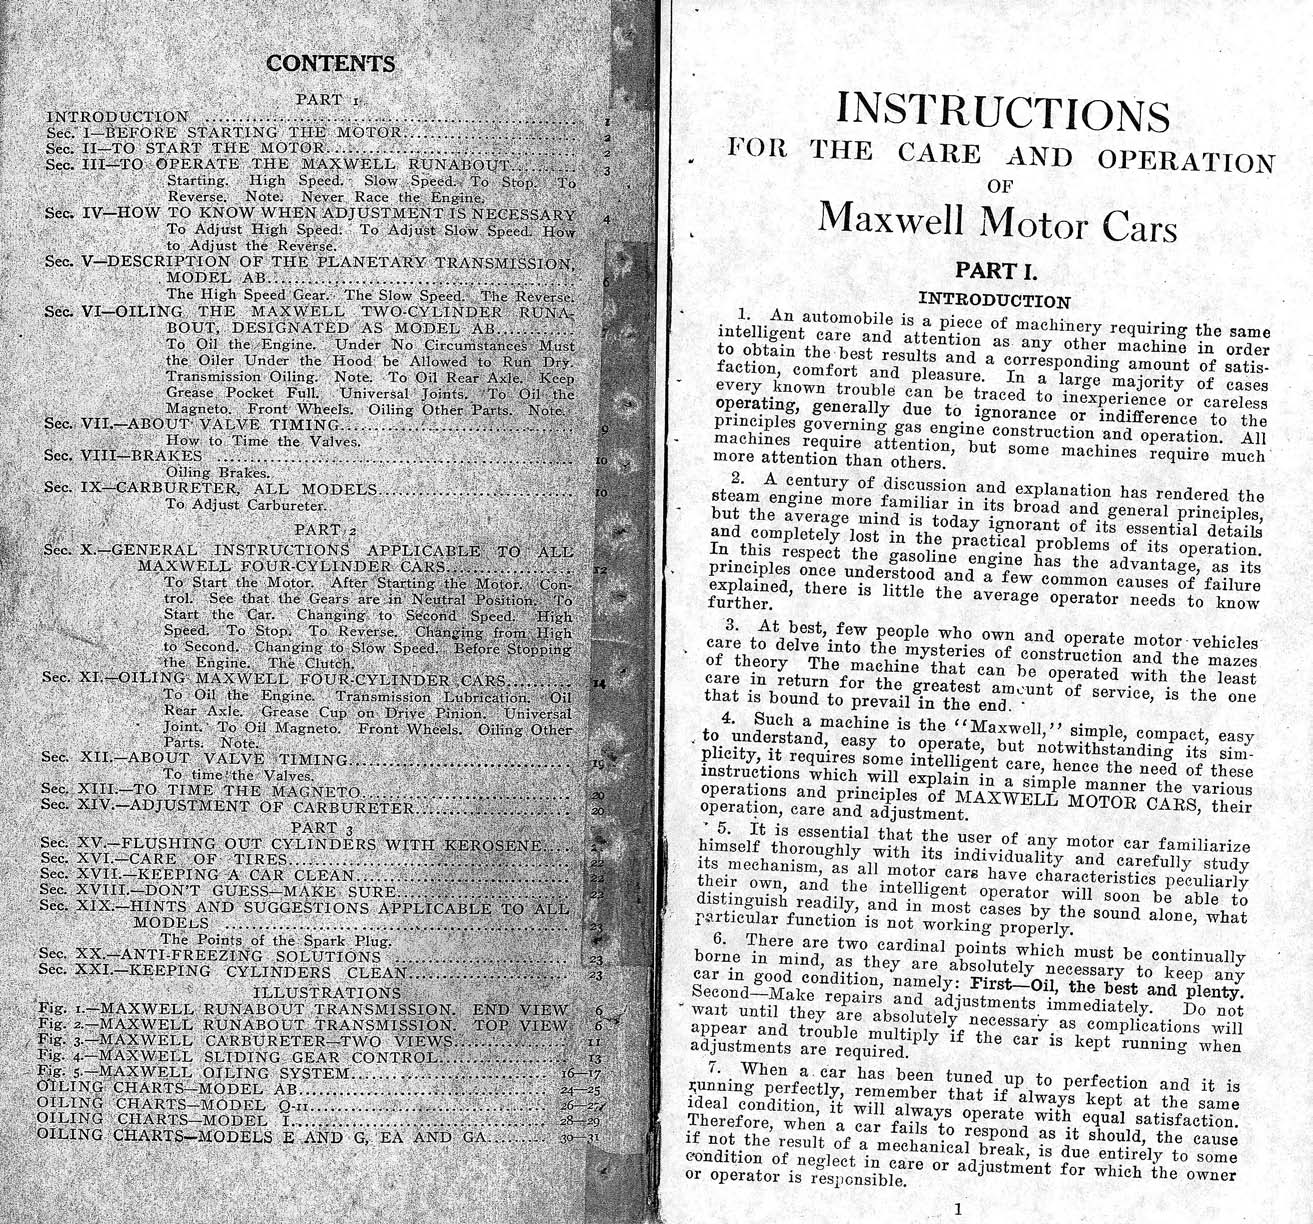 1911_Maxwell_Instructions-00a-01